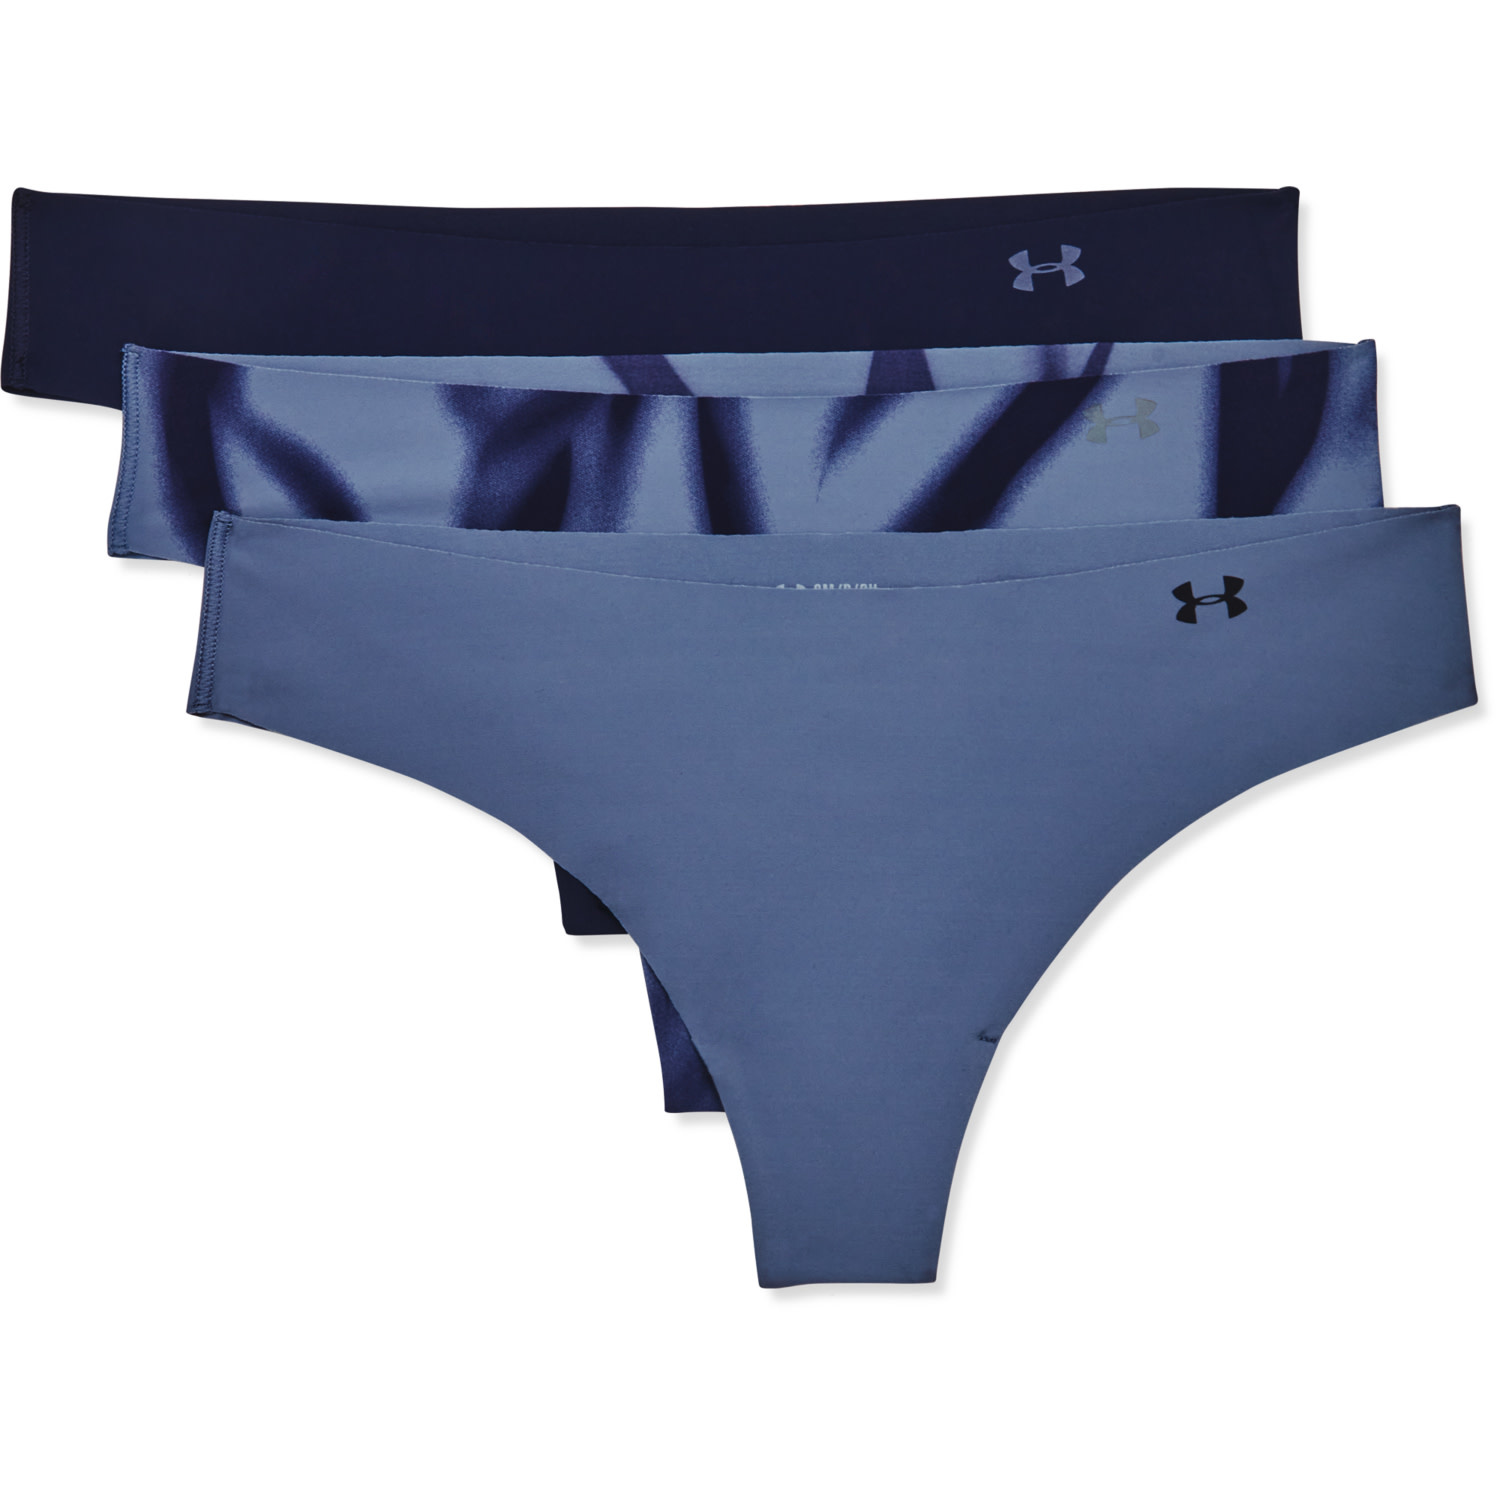 Under Armour Women's Seamless Thong - 3 Pack